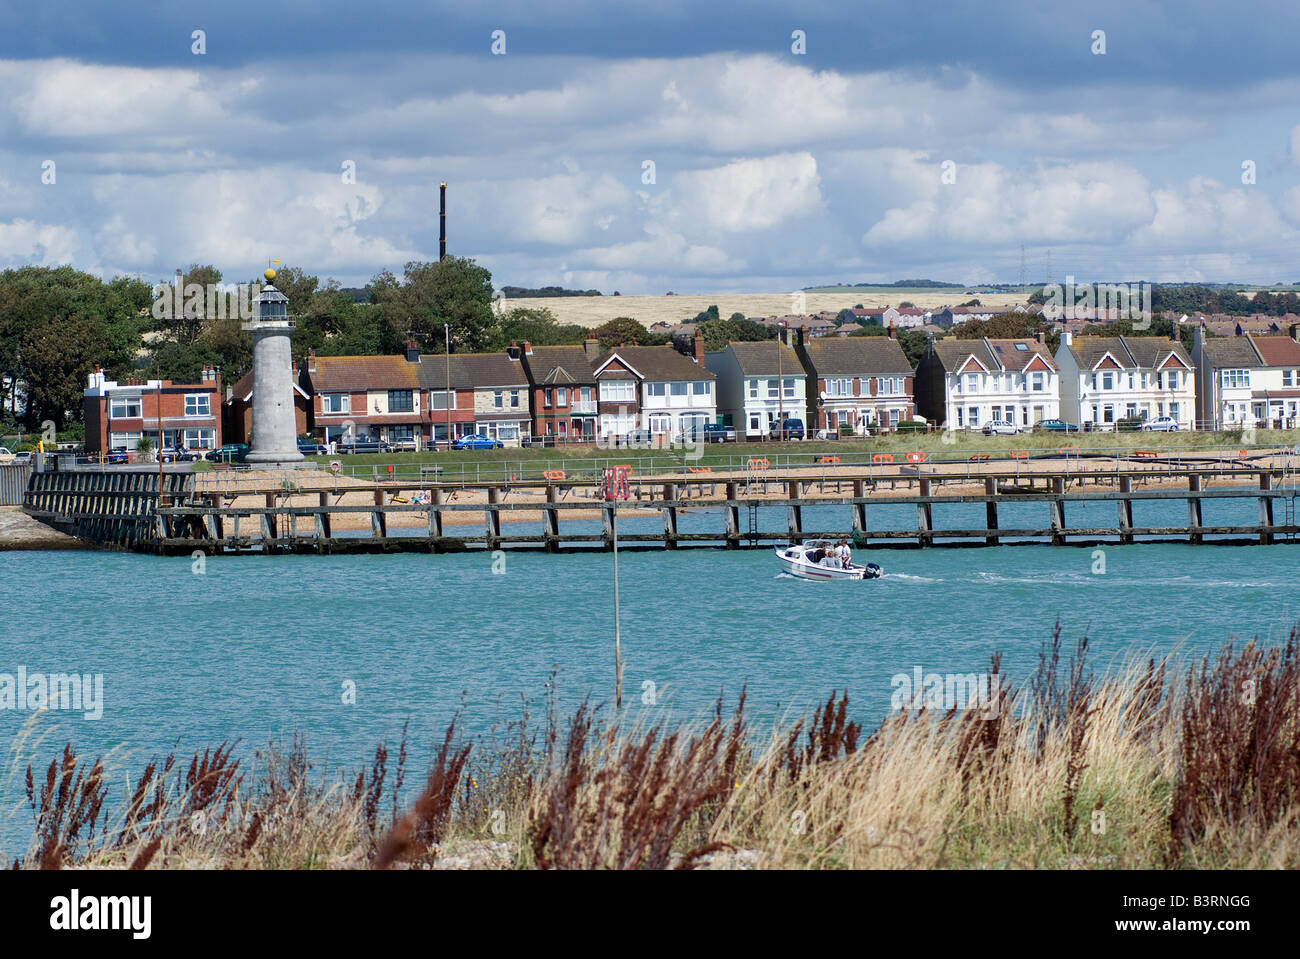 Shoreham by Sea West Sussex English seaside resort England UK The lighthouse and housing on the coast road Stock Photo